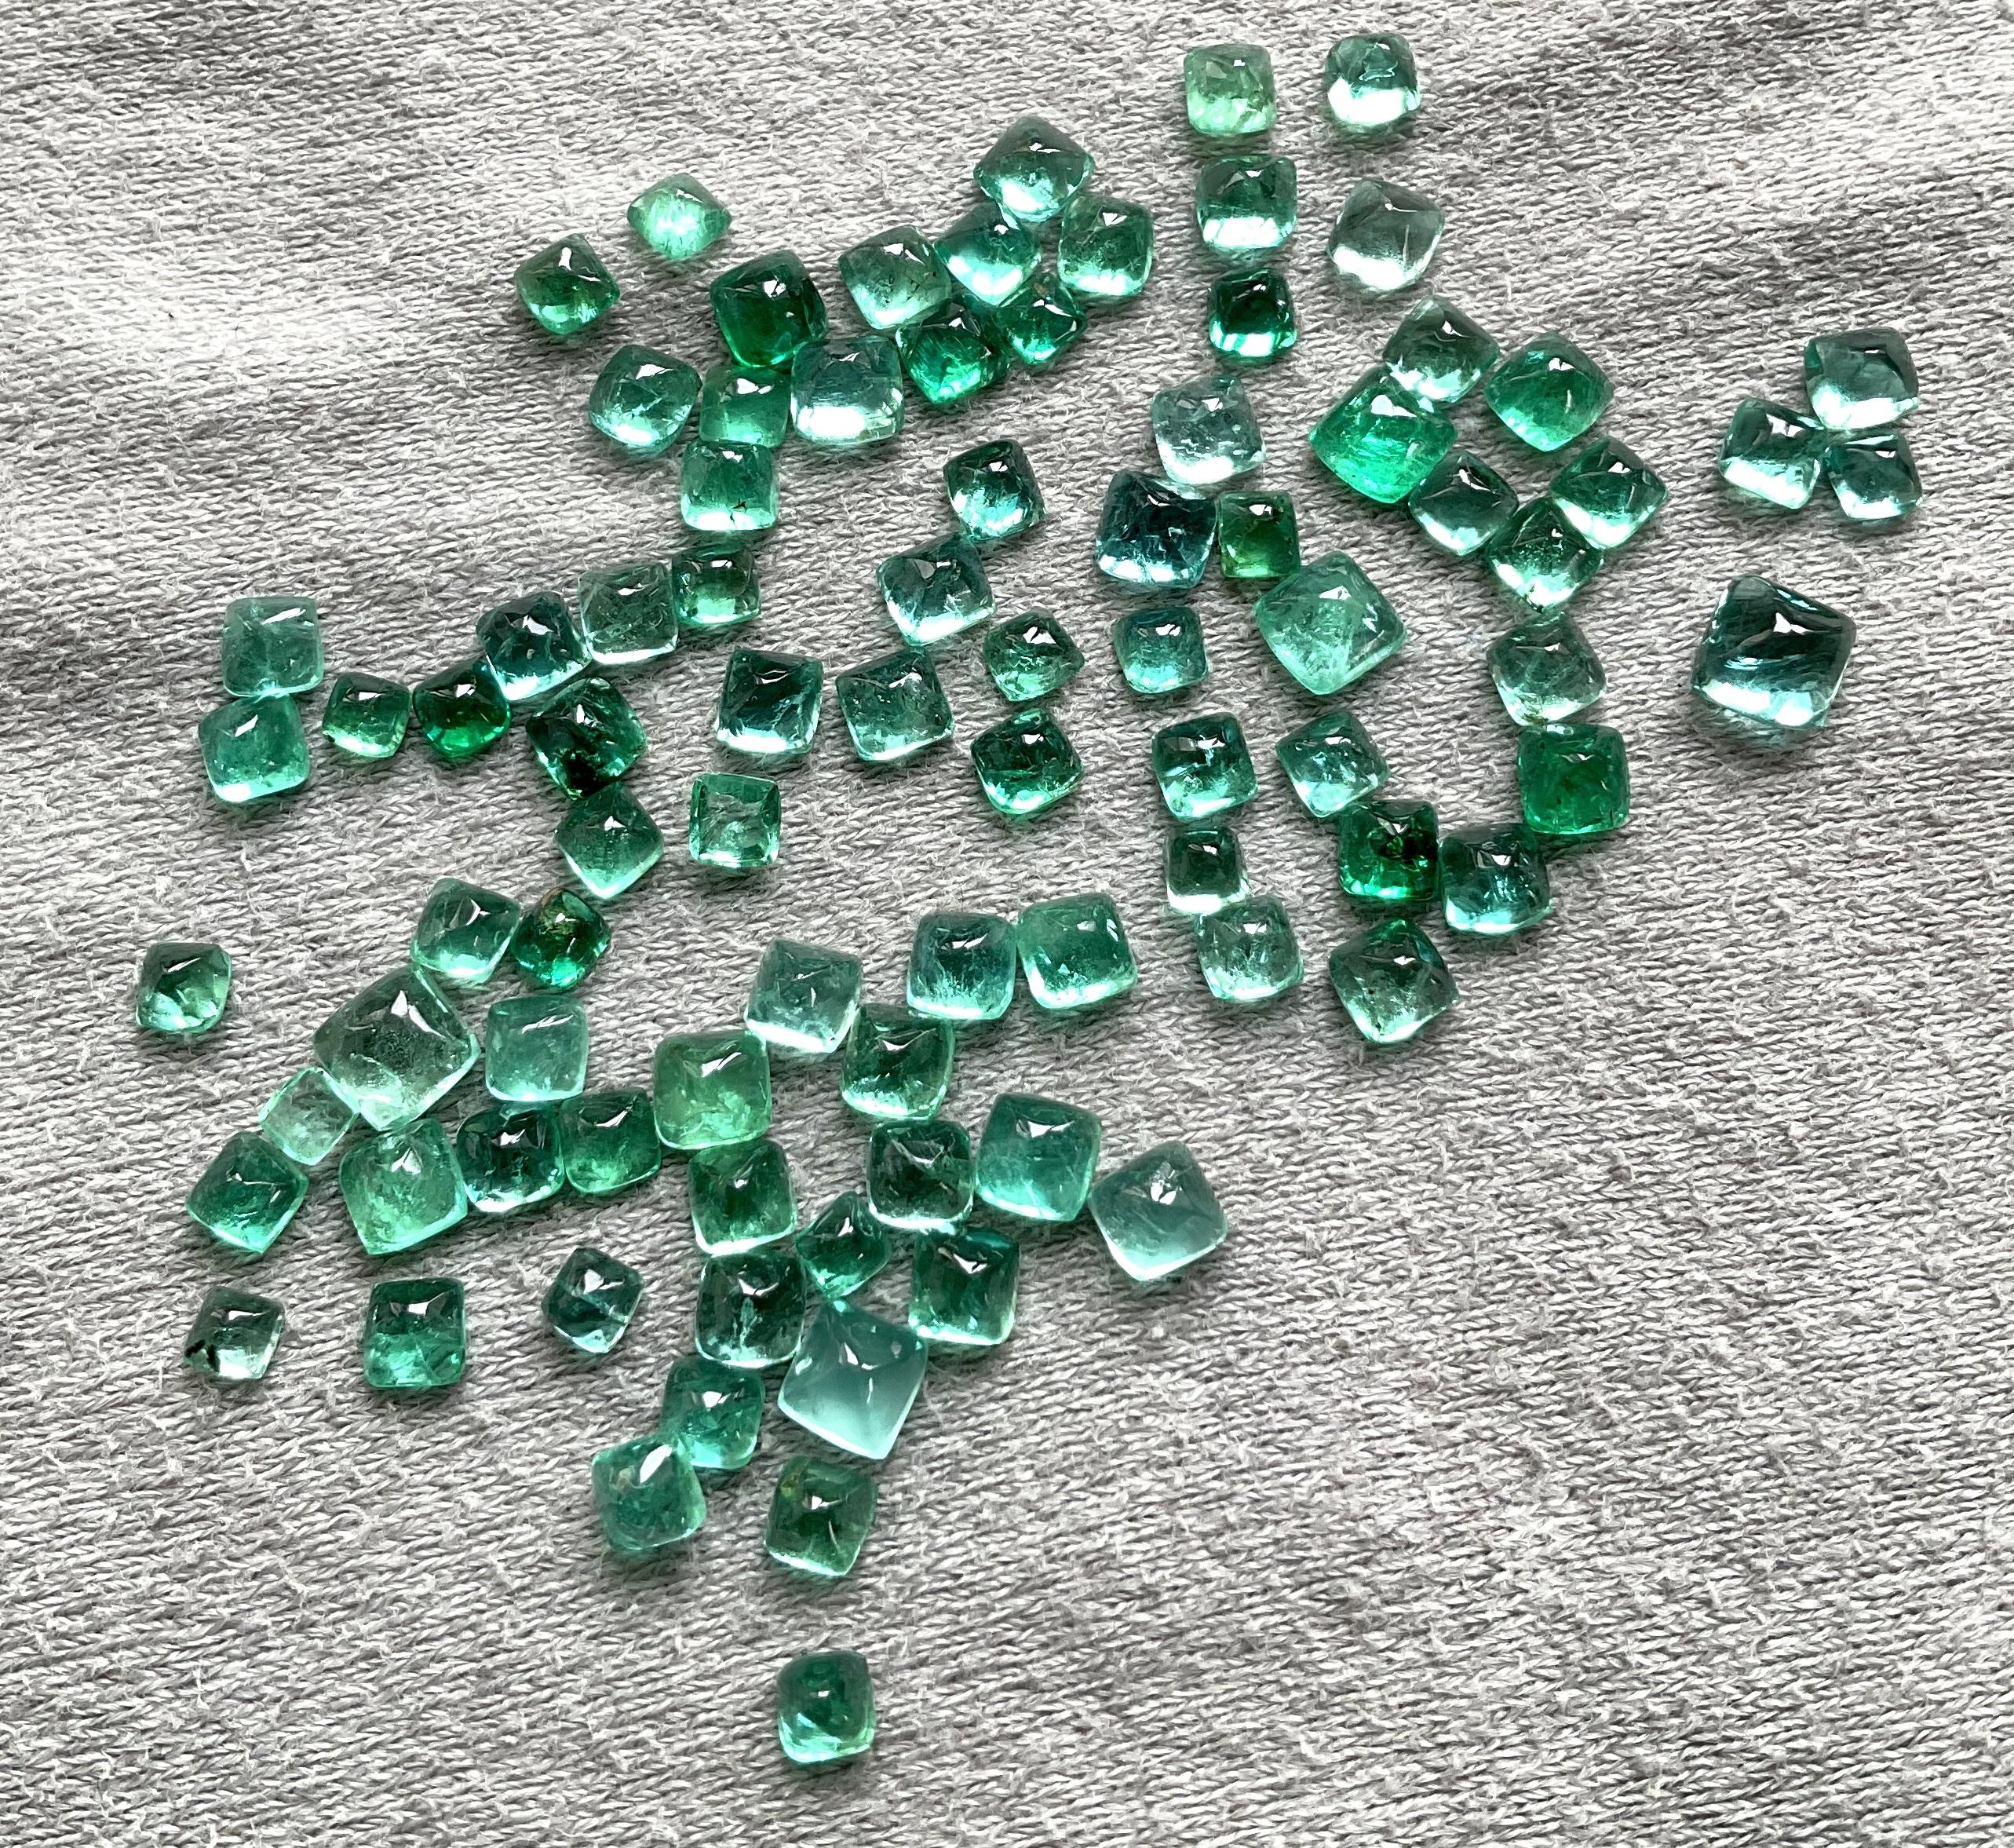 27.19 Carats Zambian Emerald Sugarloaf Cabochon For Fine Jewelry Natural Gem

Gemstone: Emerald
Weight: 27.19 Carats
Size: 3 To 5.5 MM
Pieces: 88
Shape: Sugarloaf